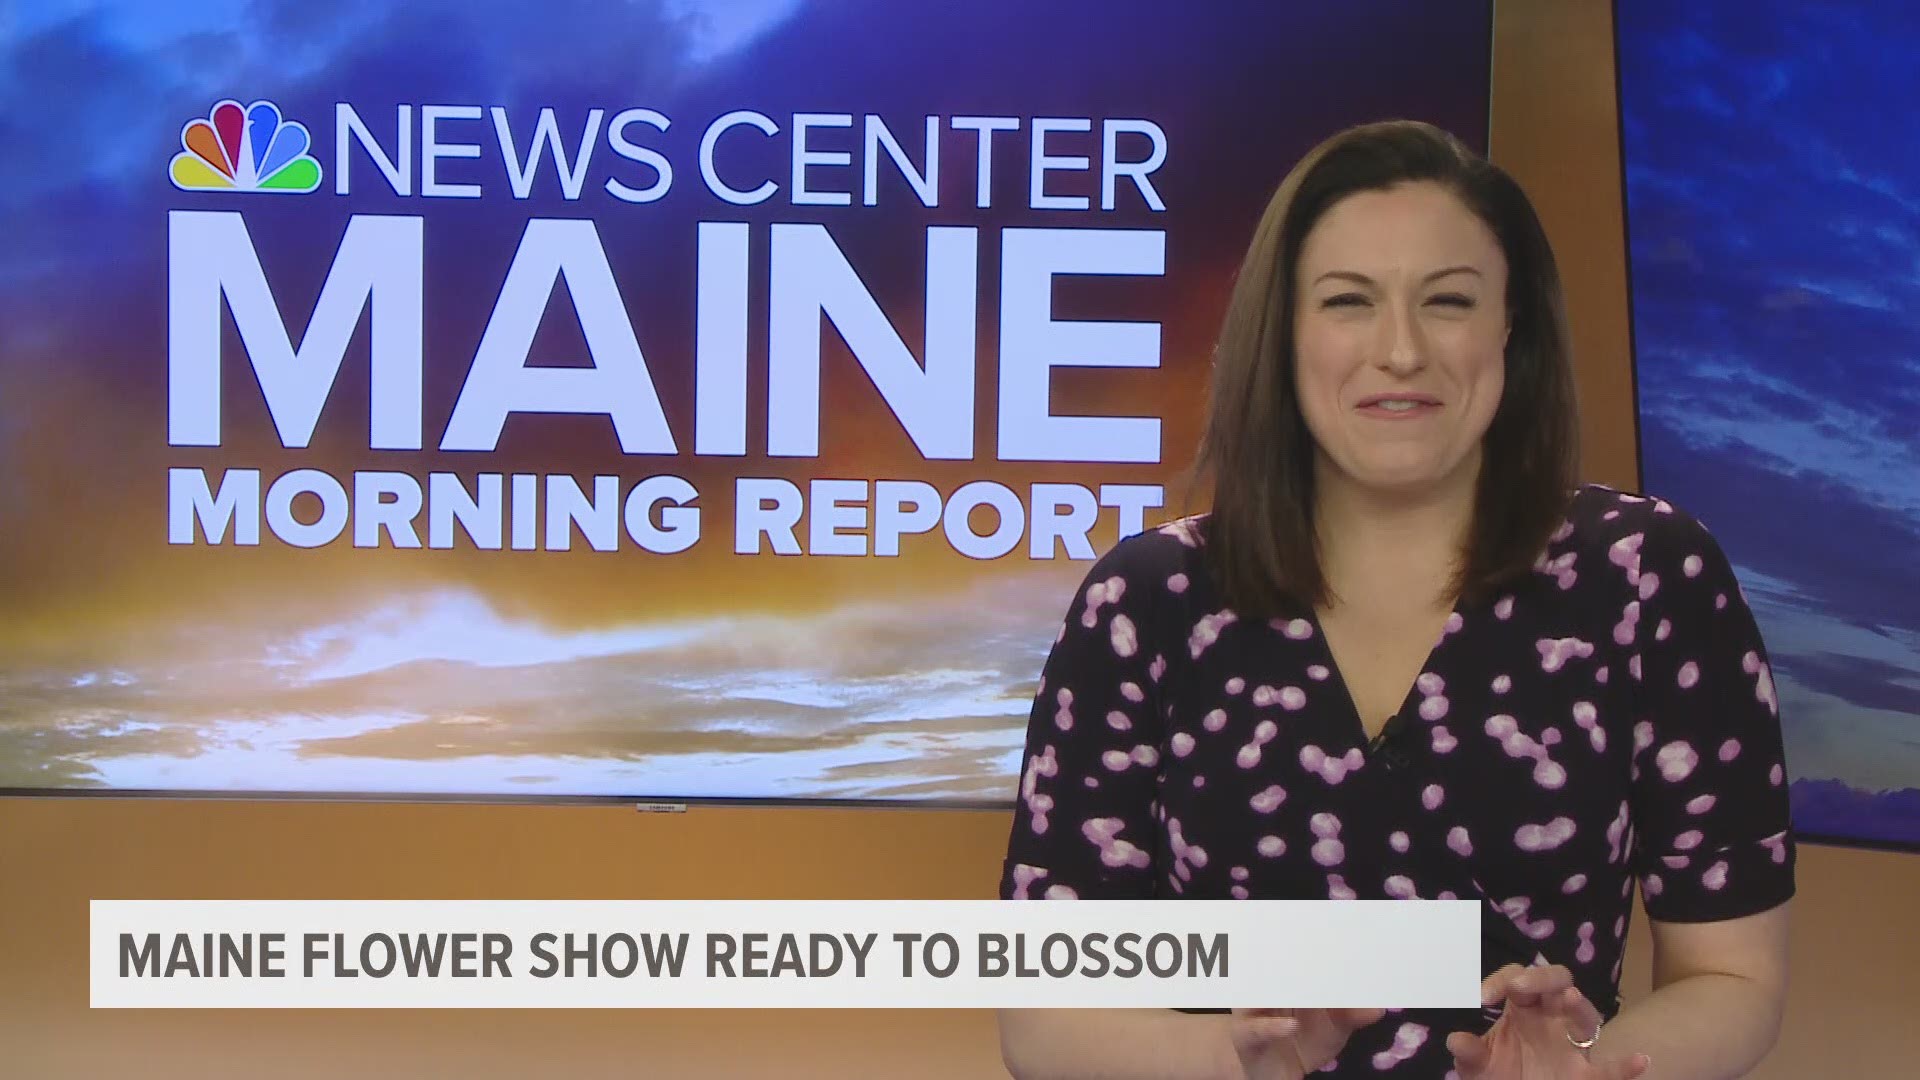 Maine Flower Show set to begin on March 27 in Portland